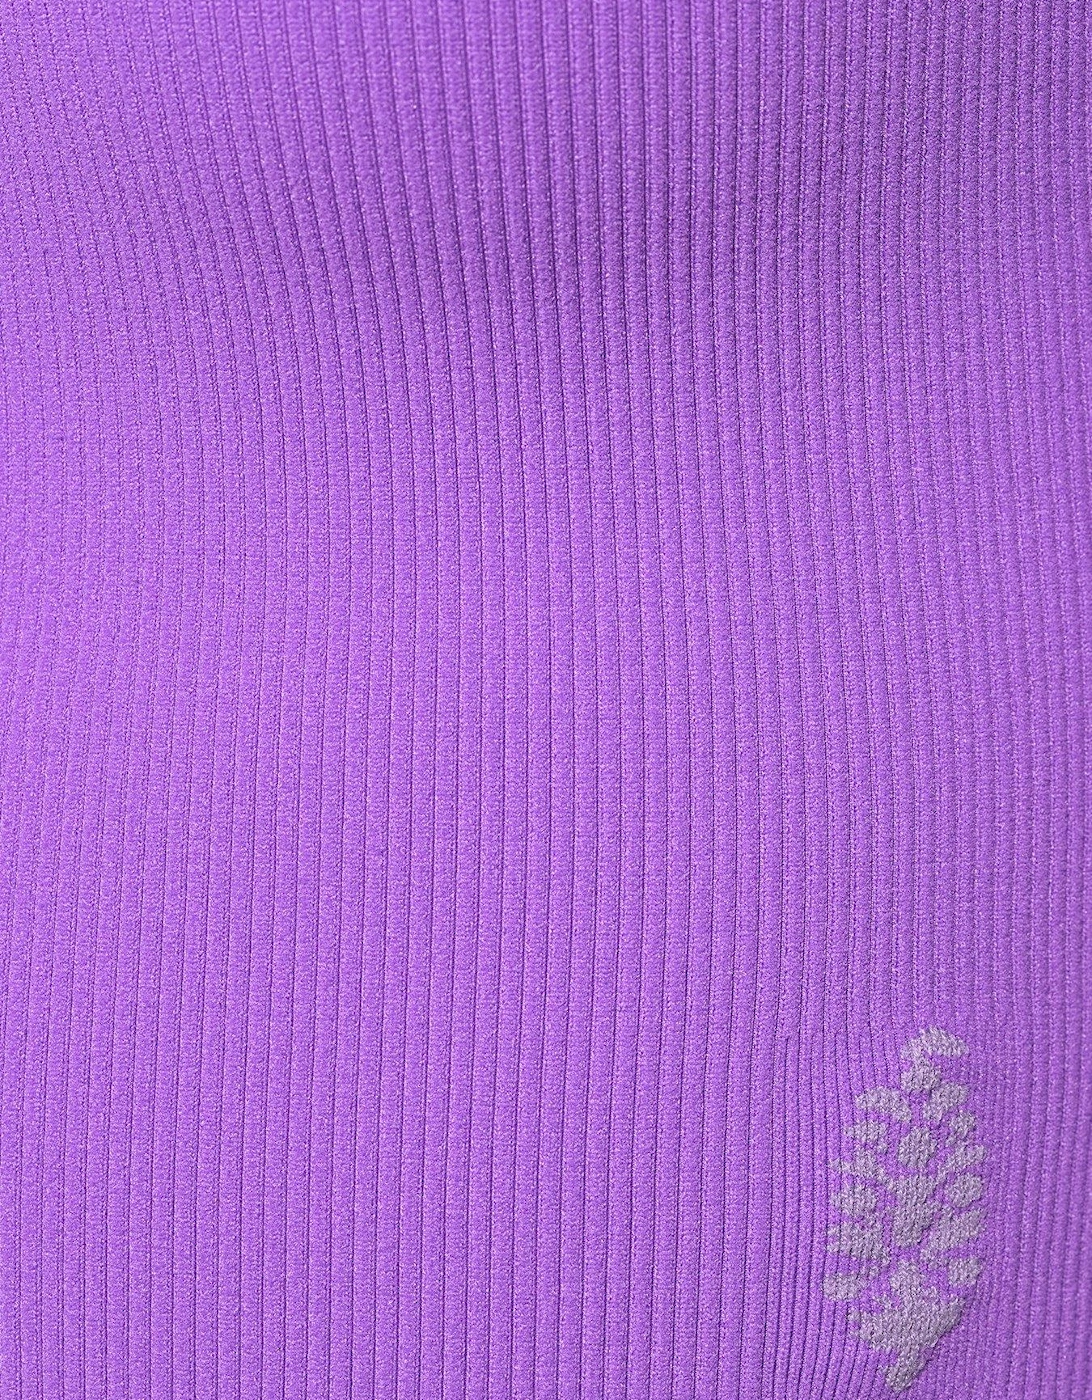 Movement All Clear Solid Cami - Purple